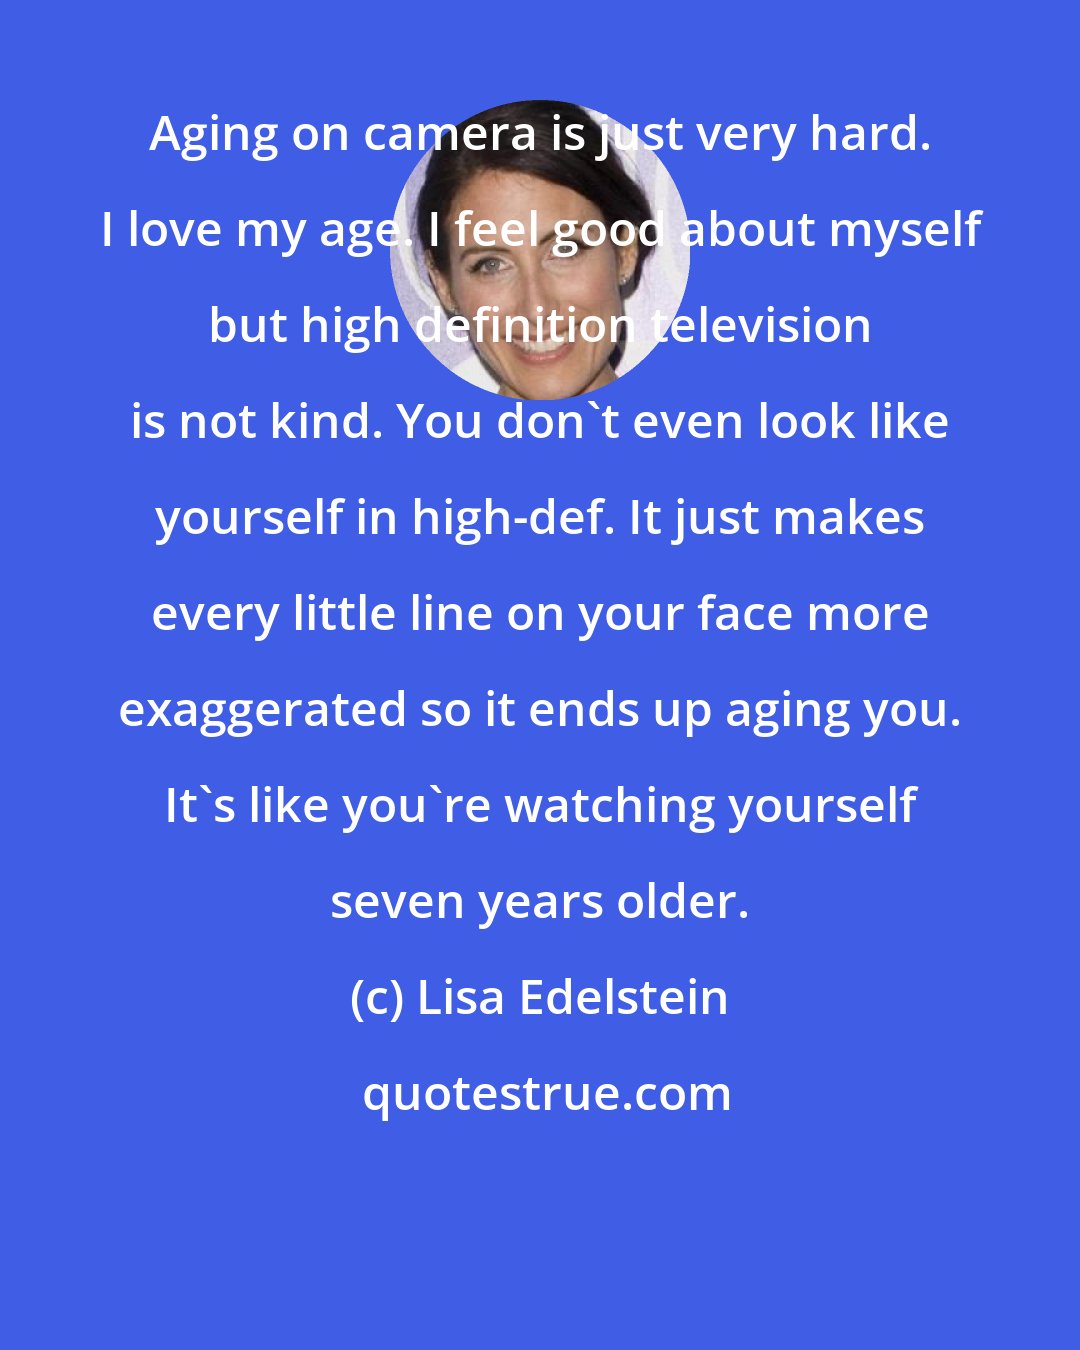 Lisa Edelstein: Aging on camera is just very hard. I love my age. I feel good about myself but high definition television is not kind. You don't even look like yourself in high-def. It just makes every little line on your face more exaggerated so it ends up aging you. It's like you're watching yourself seven years older.